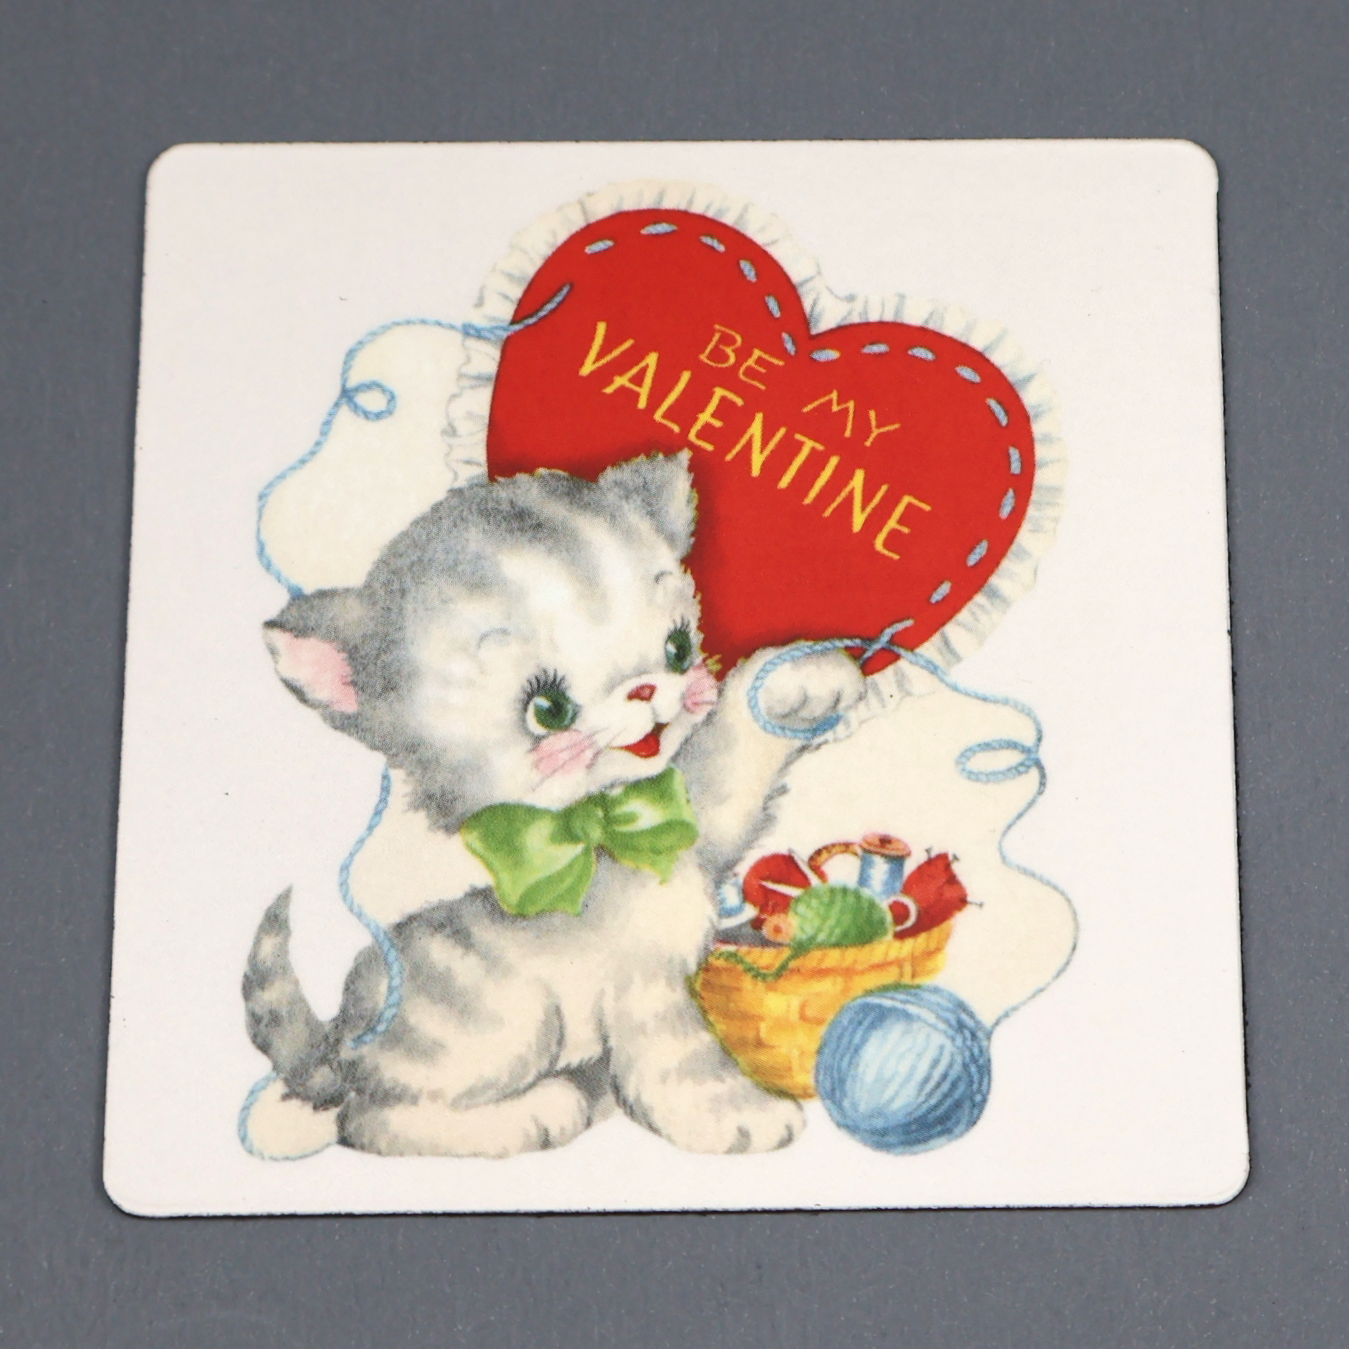 Valentines Day Vintage Style Kittens and Puppies 3x3 Magnet Set of 4-Magnet-Oakview Collectibles